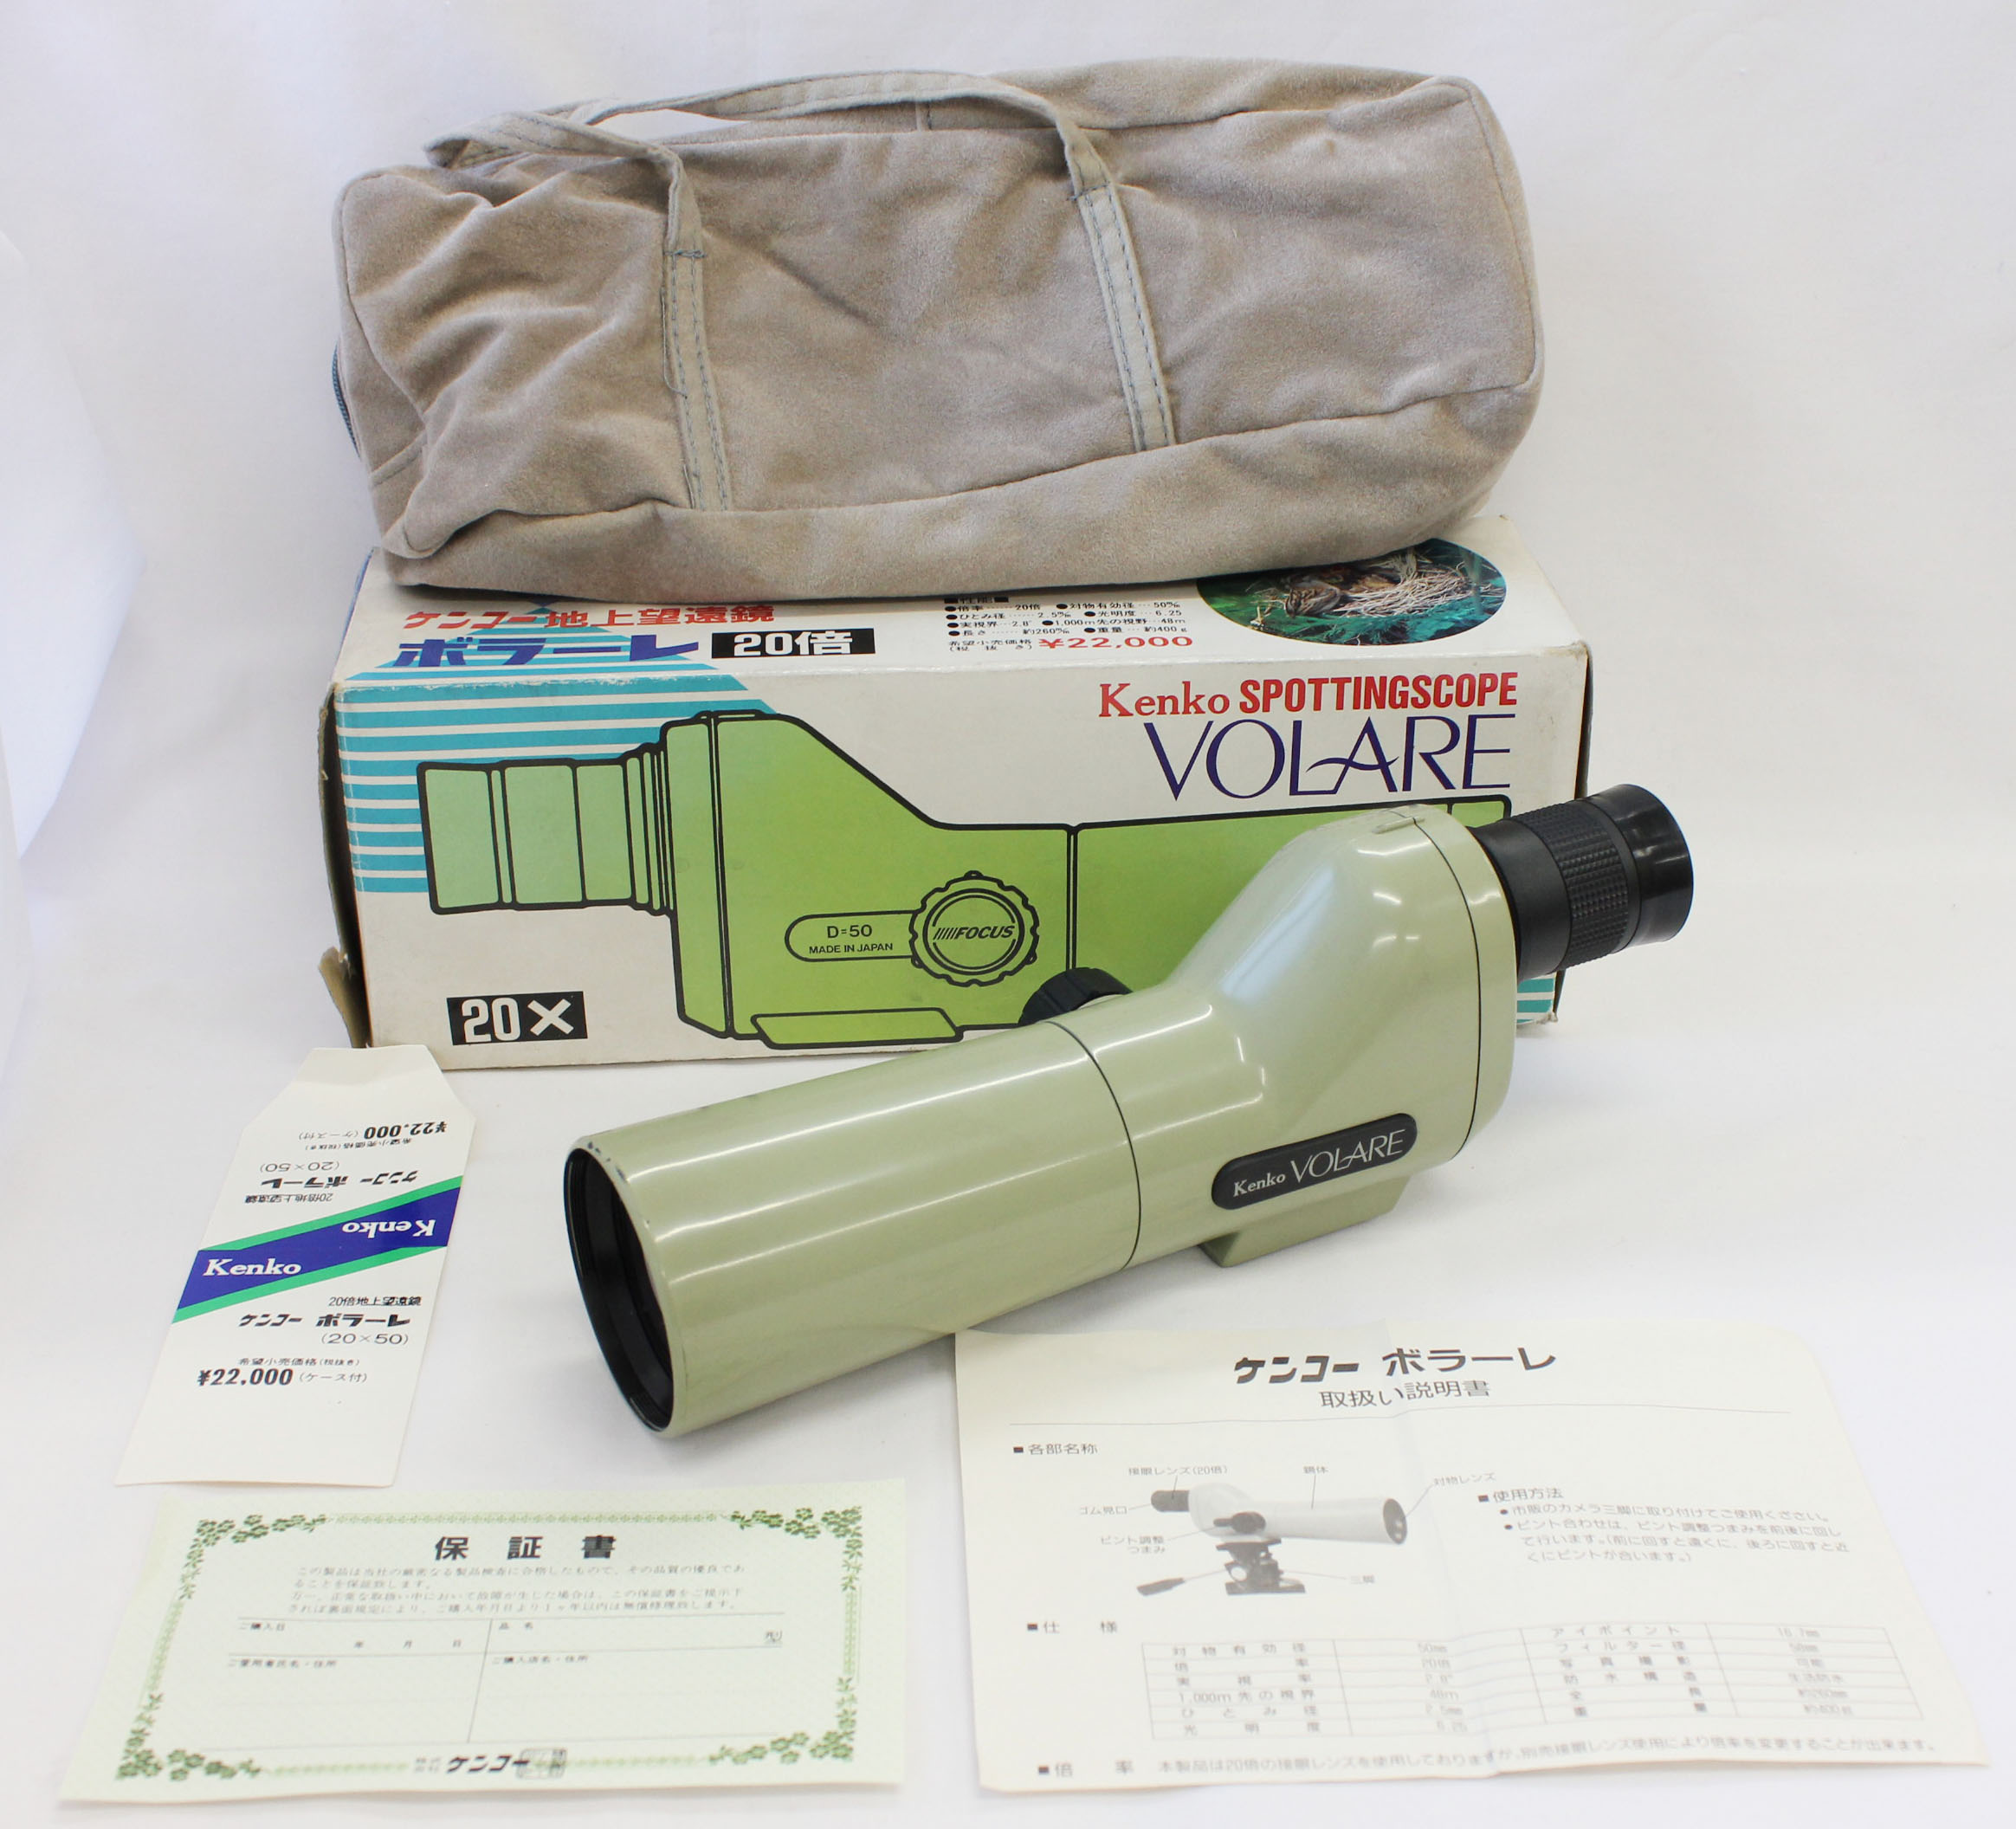 Japan Used Camera Shop | [Excellent+++++] Kenko Volare Spotting Scope 20x D=50 in Case/Box from Japan